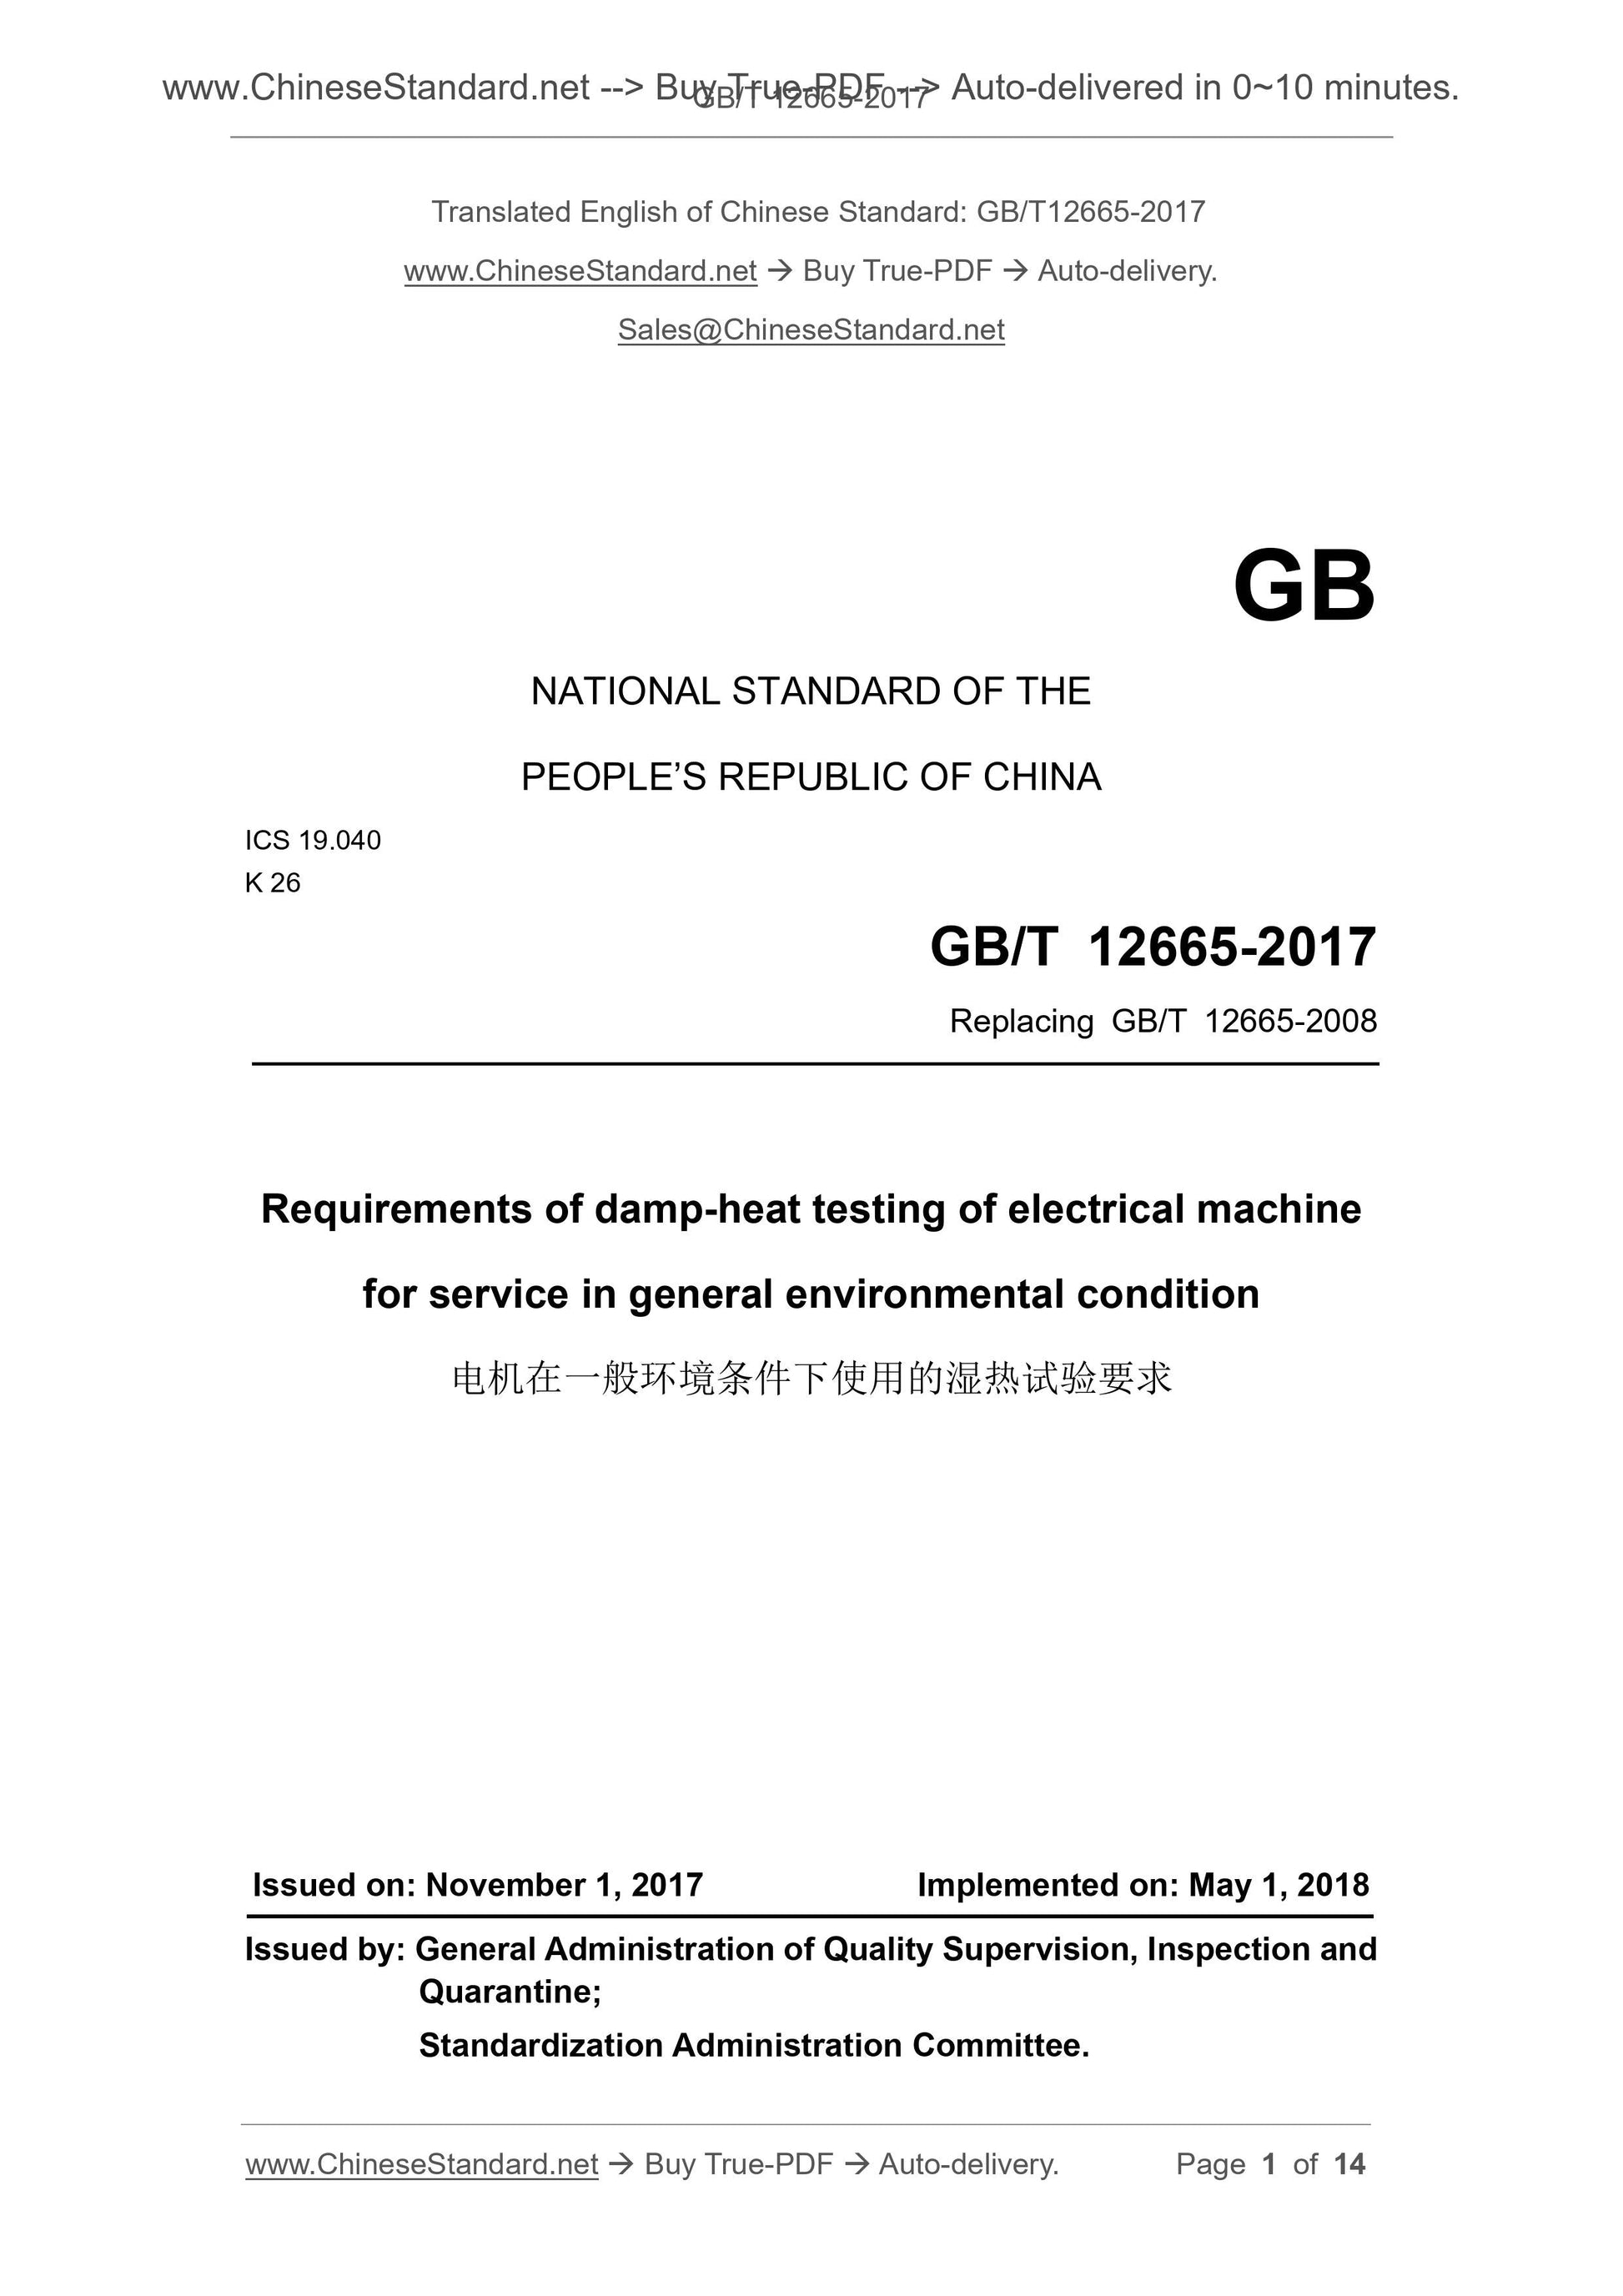 GB/T 12665-2017 Page 1